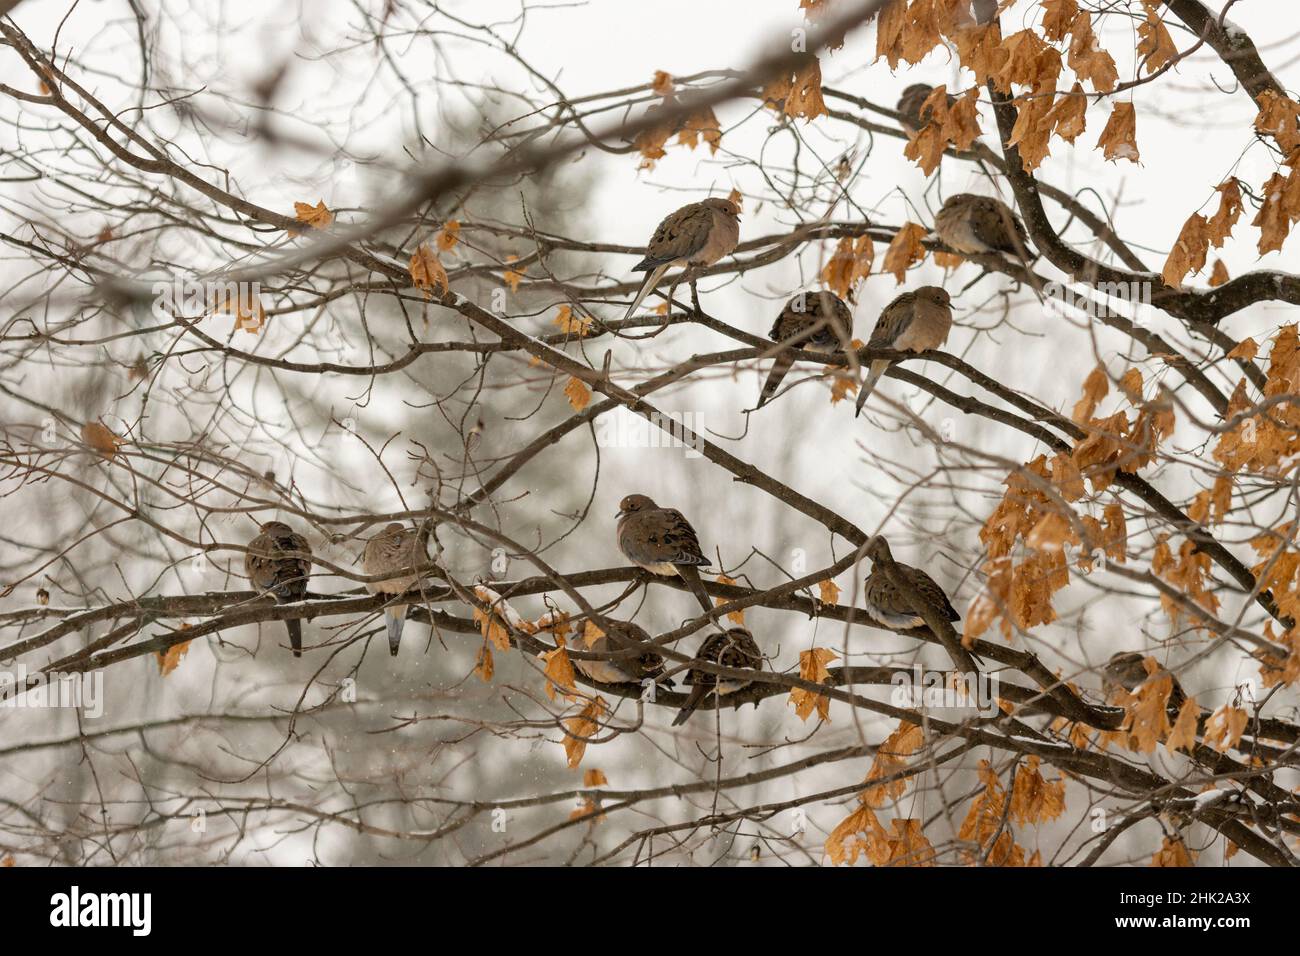 A Cote of Mourning Doves Perched On Branches of A Maple Tree Stock Photo